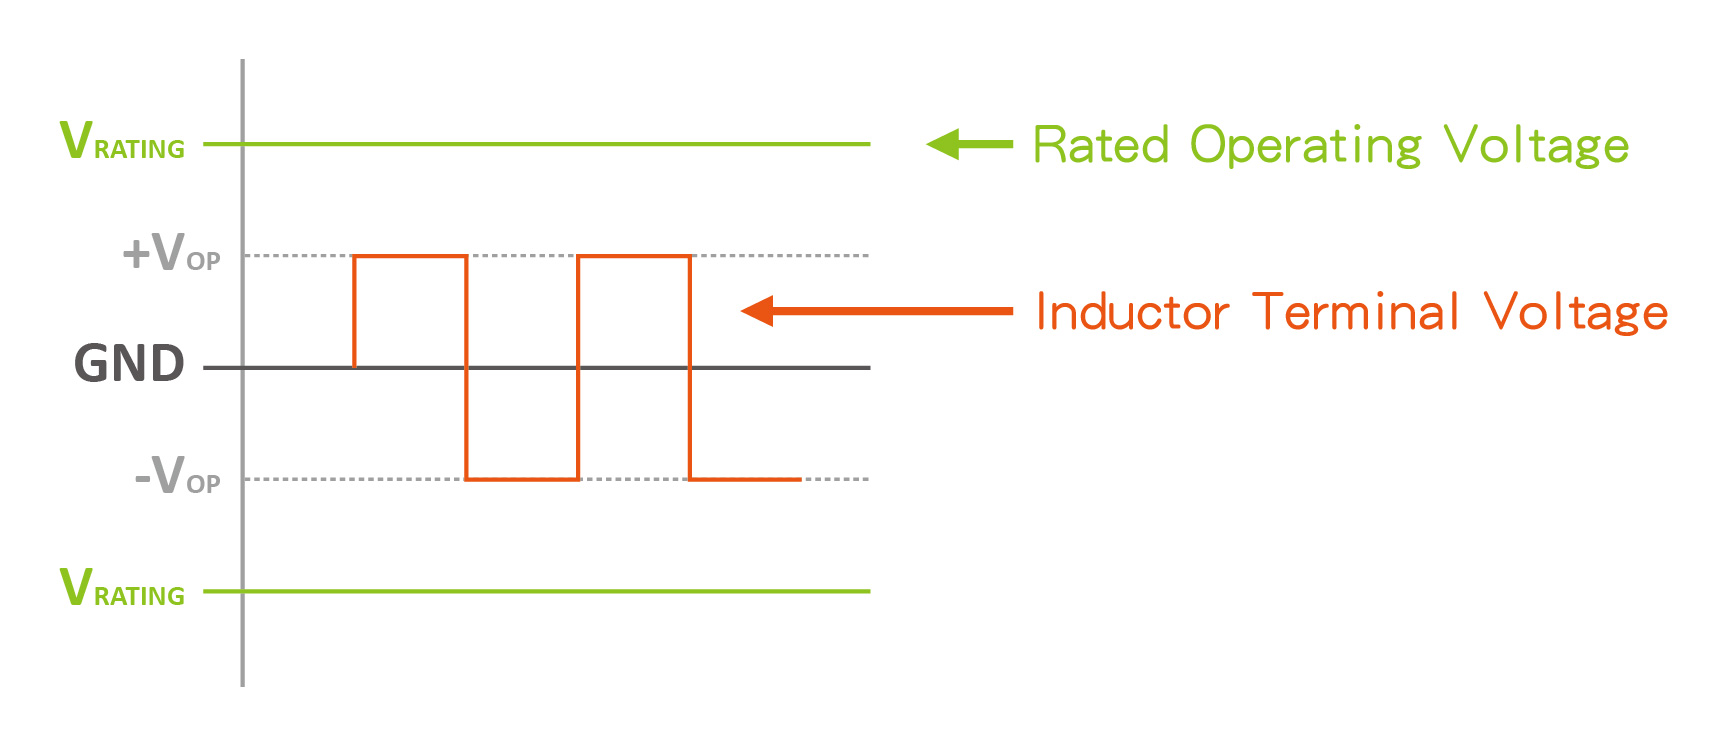 Inductance rating ≧ Expected voltage